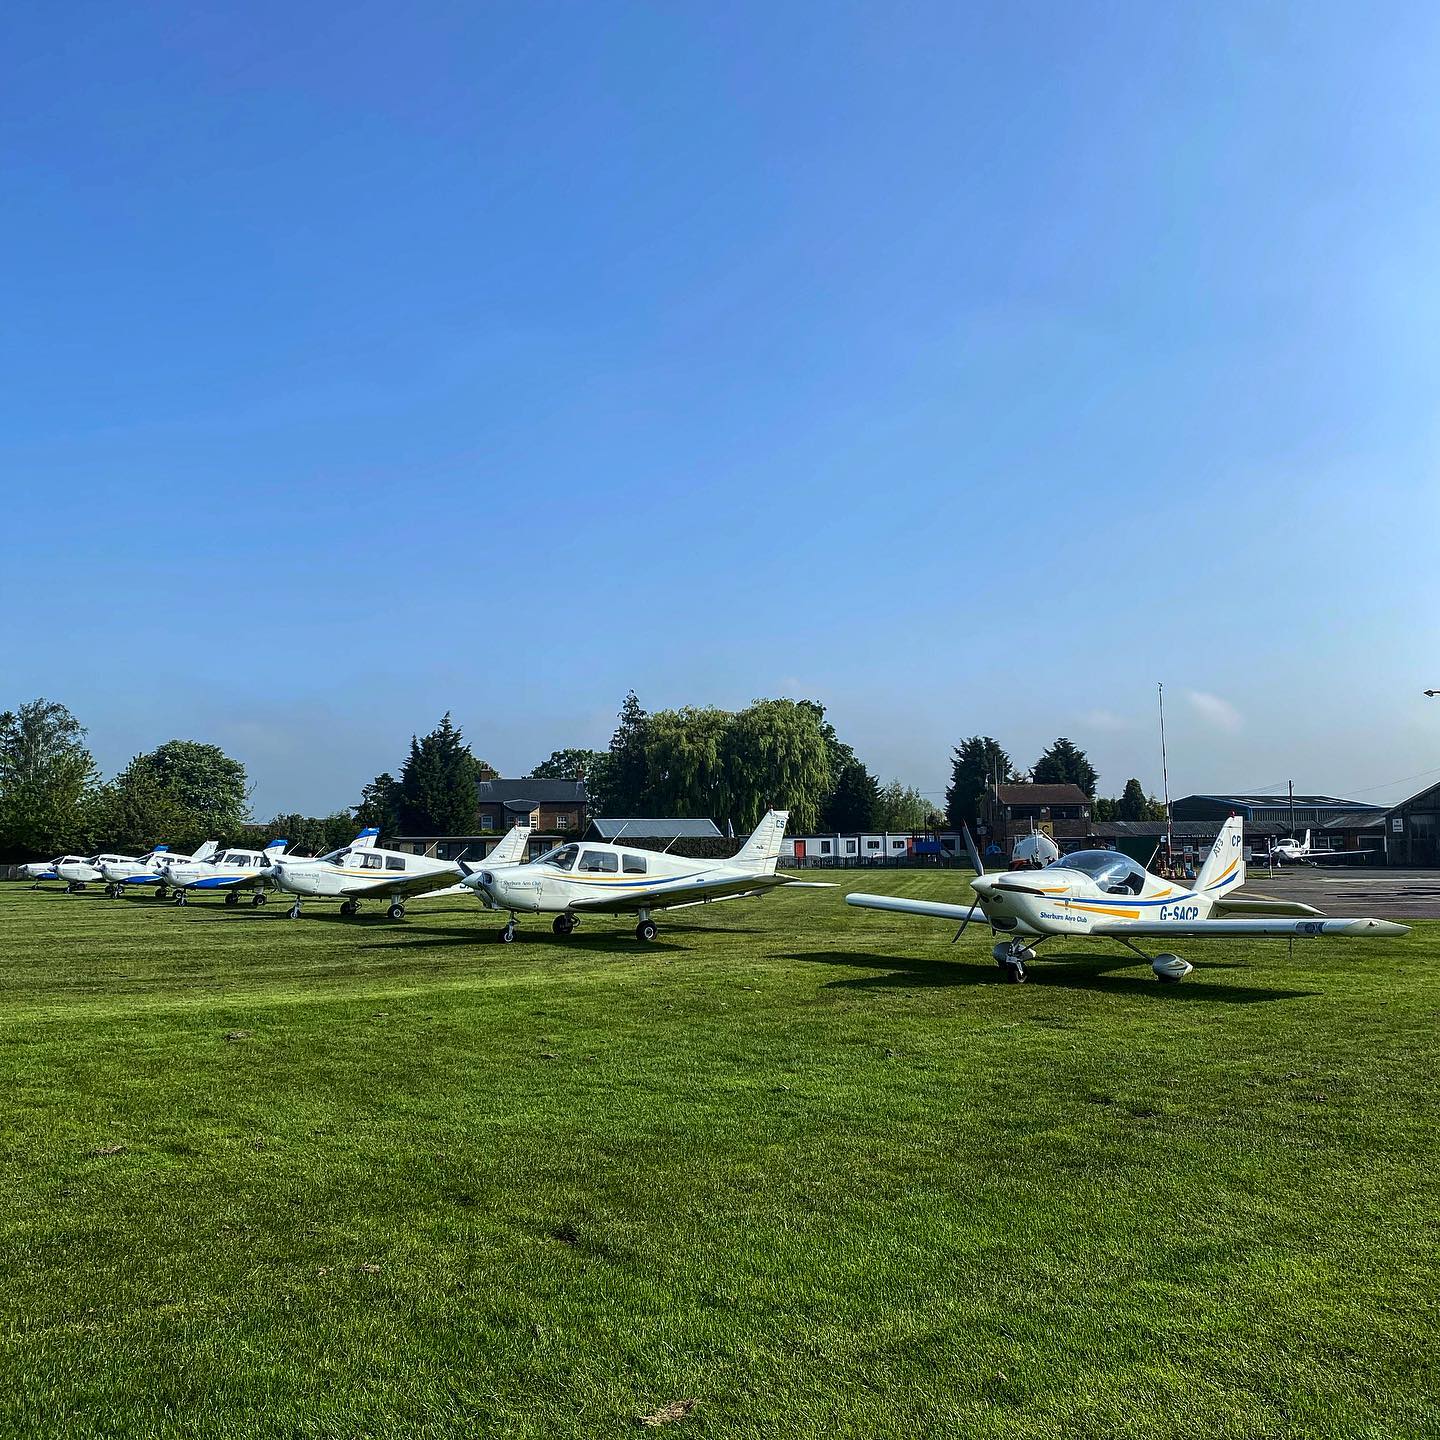 Aero clubs in the North of England